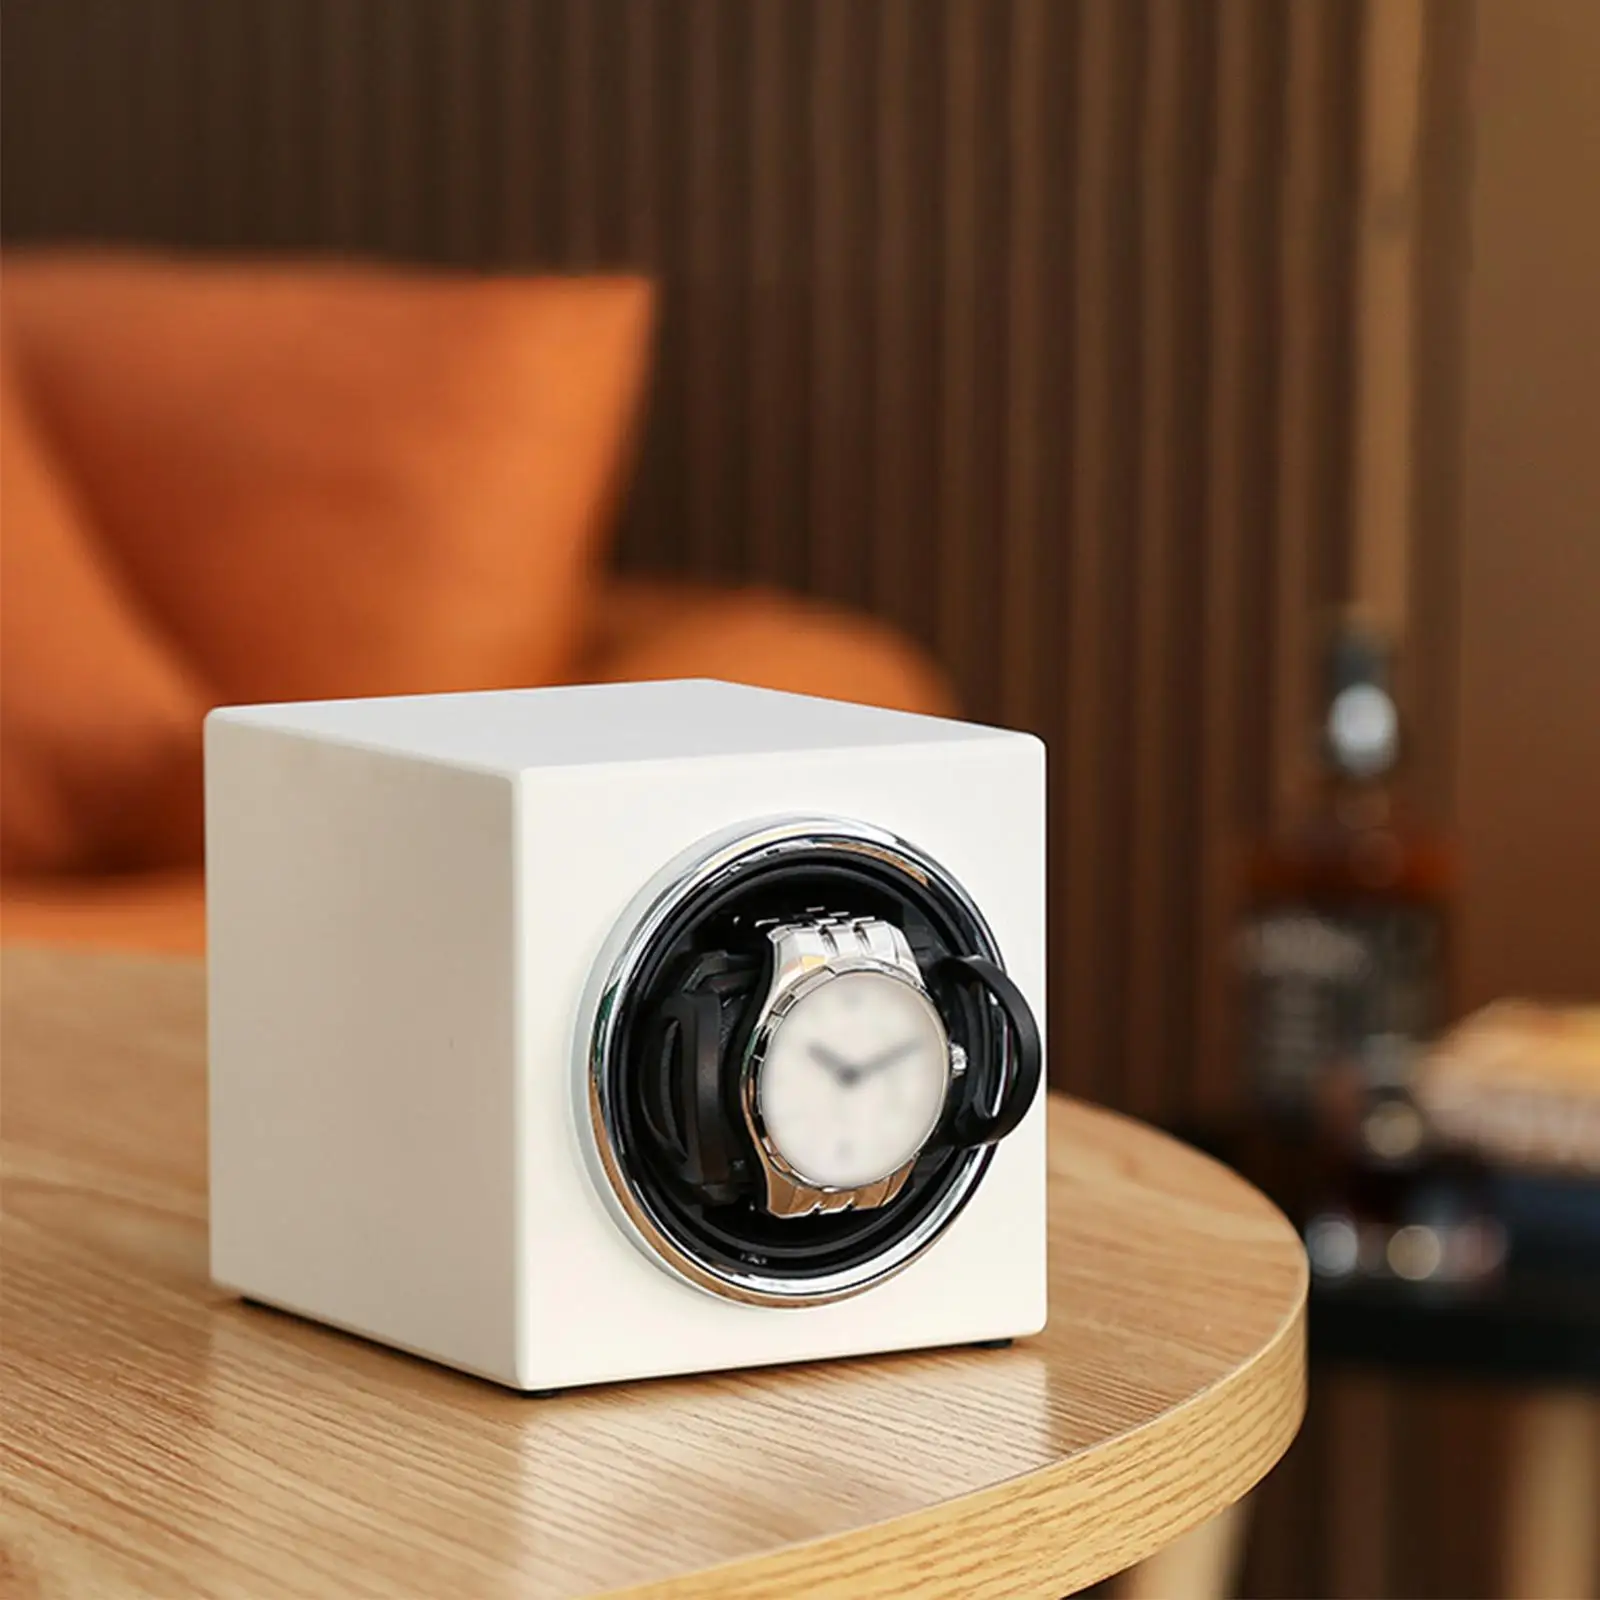 Automatic Single Watch Winder Jewelry Storage Quiet Motor USB 2 Rotation Mode Compact Watch Holder for Mechanical Watches Unisex